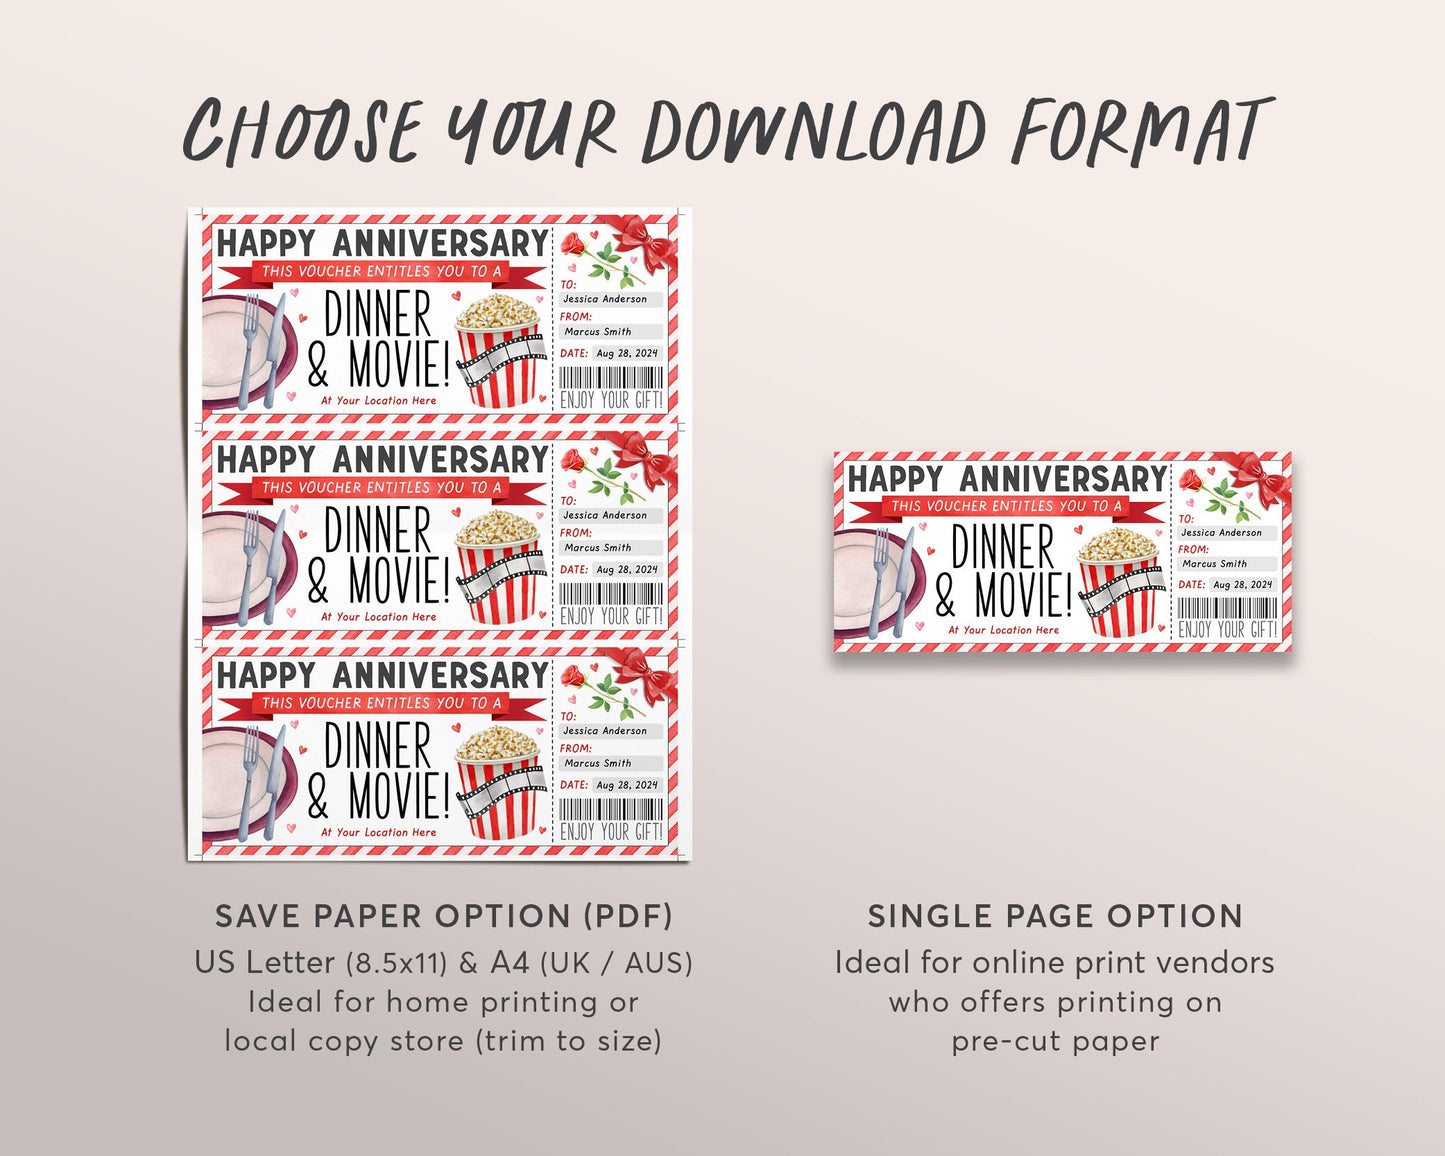 Dinner and Movie Gift Voucher Editable Template, Wedding Anniversary Surprise Date Night Restaurant Gift Certificate Reveal For Wife Husband